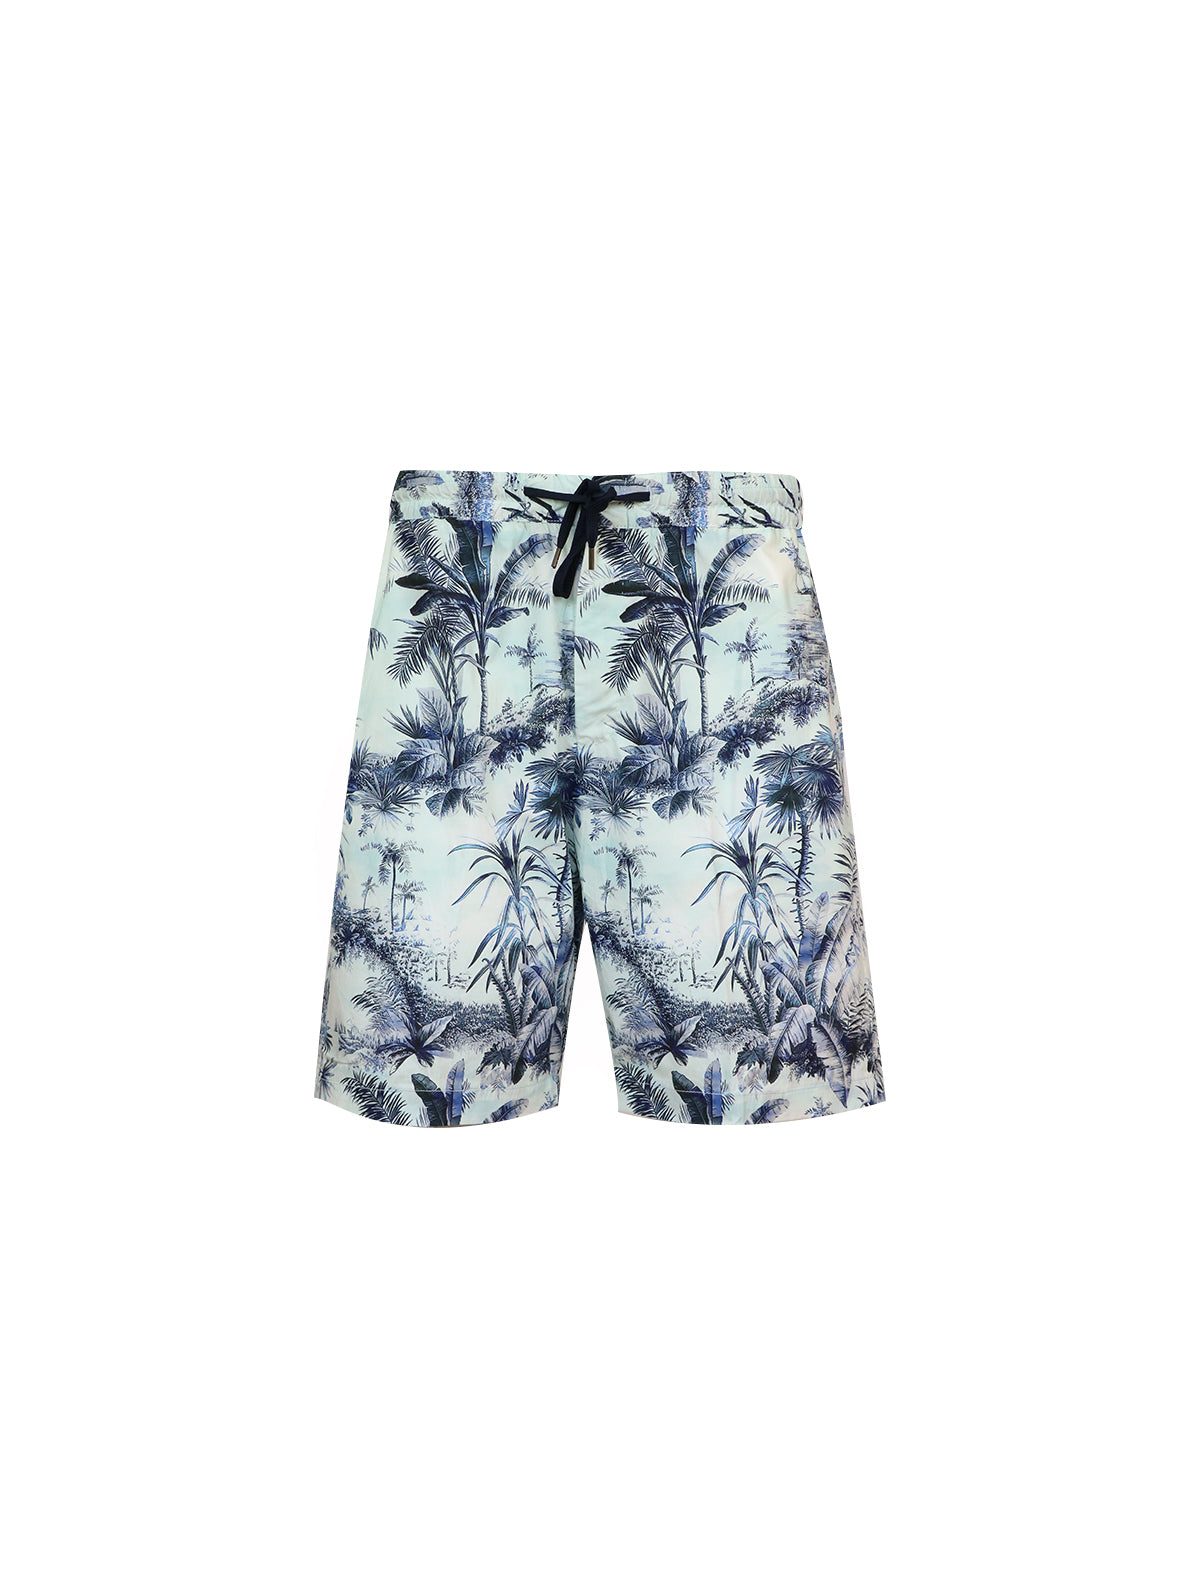 PT TORINO Cotton Short in Blue Tropical Floral